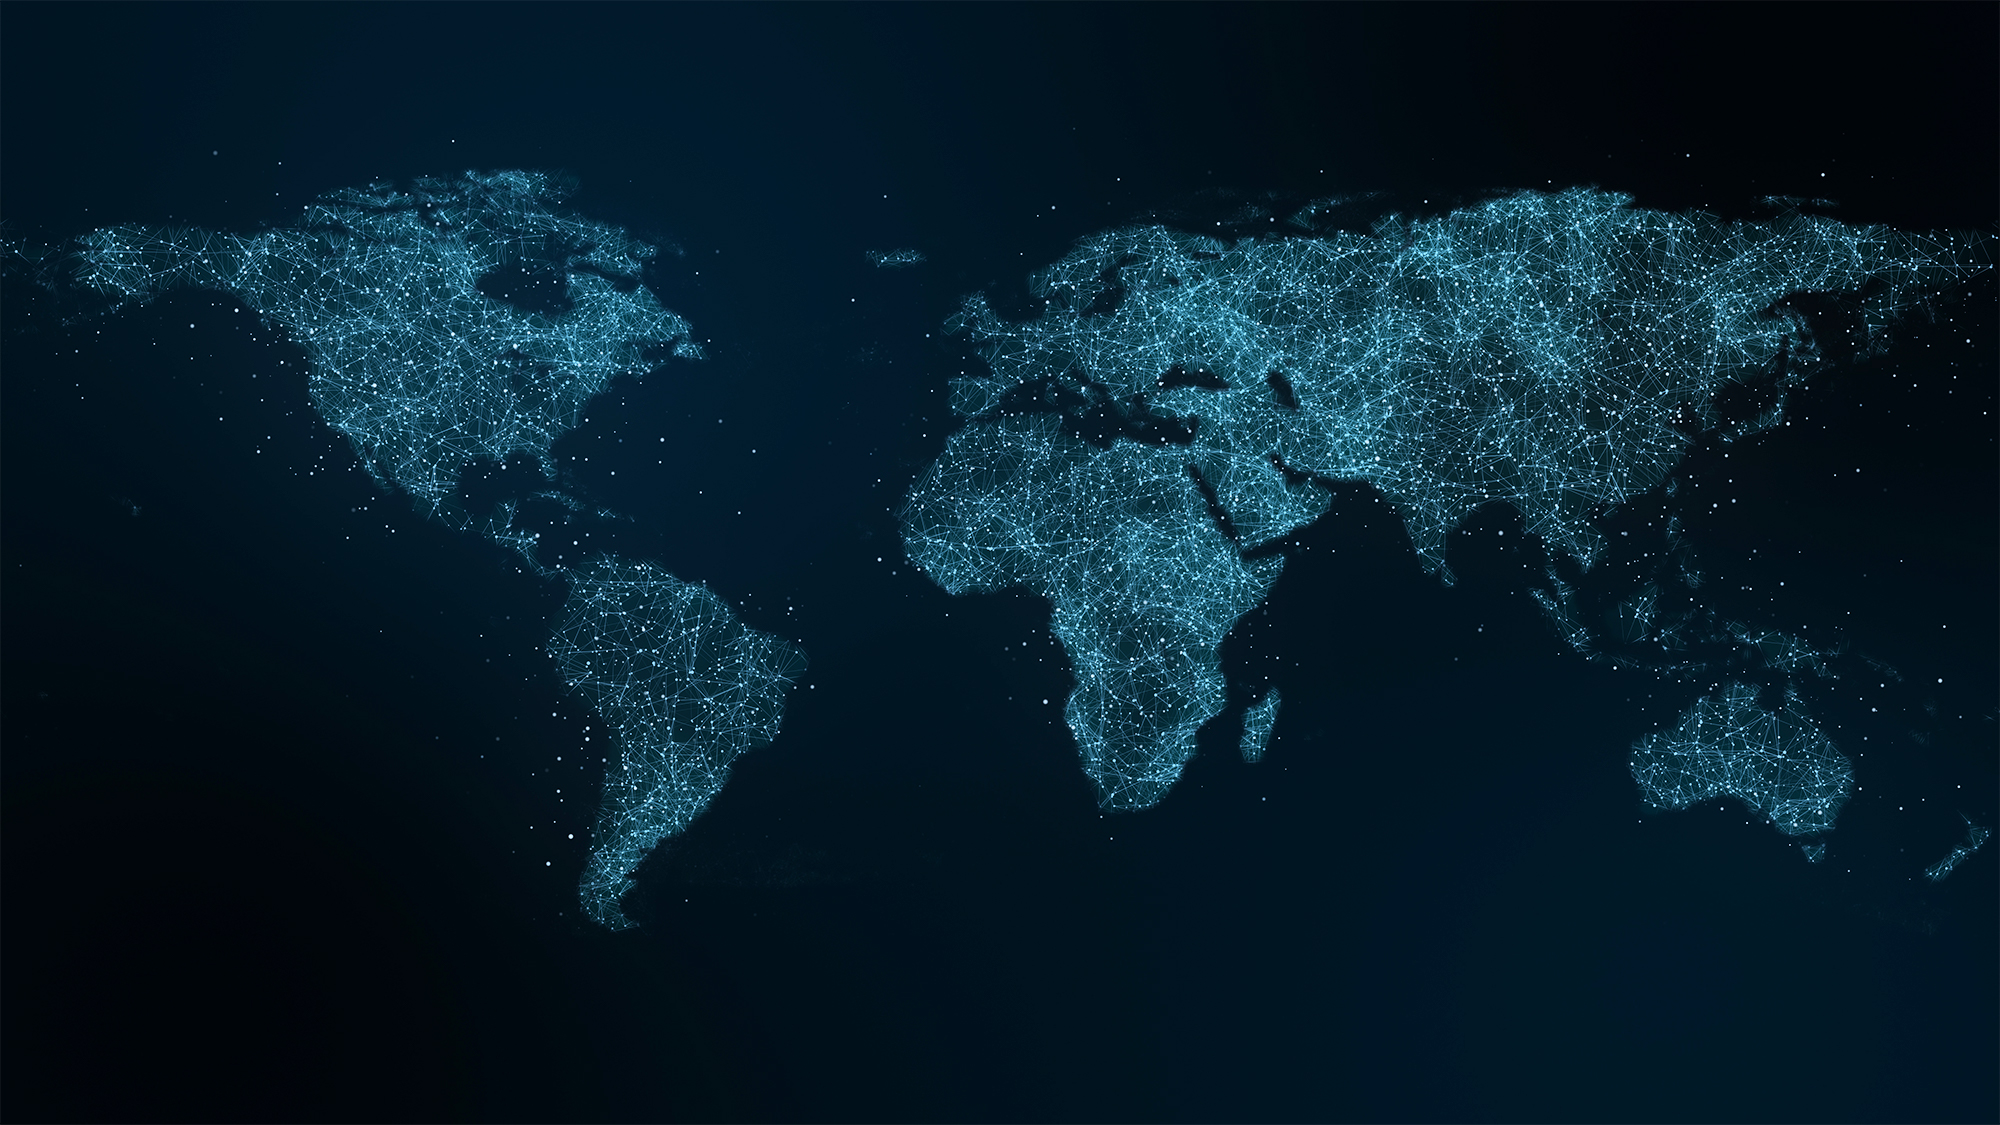 A world map with major cities depicted as points of light